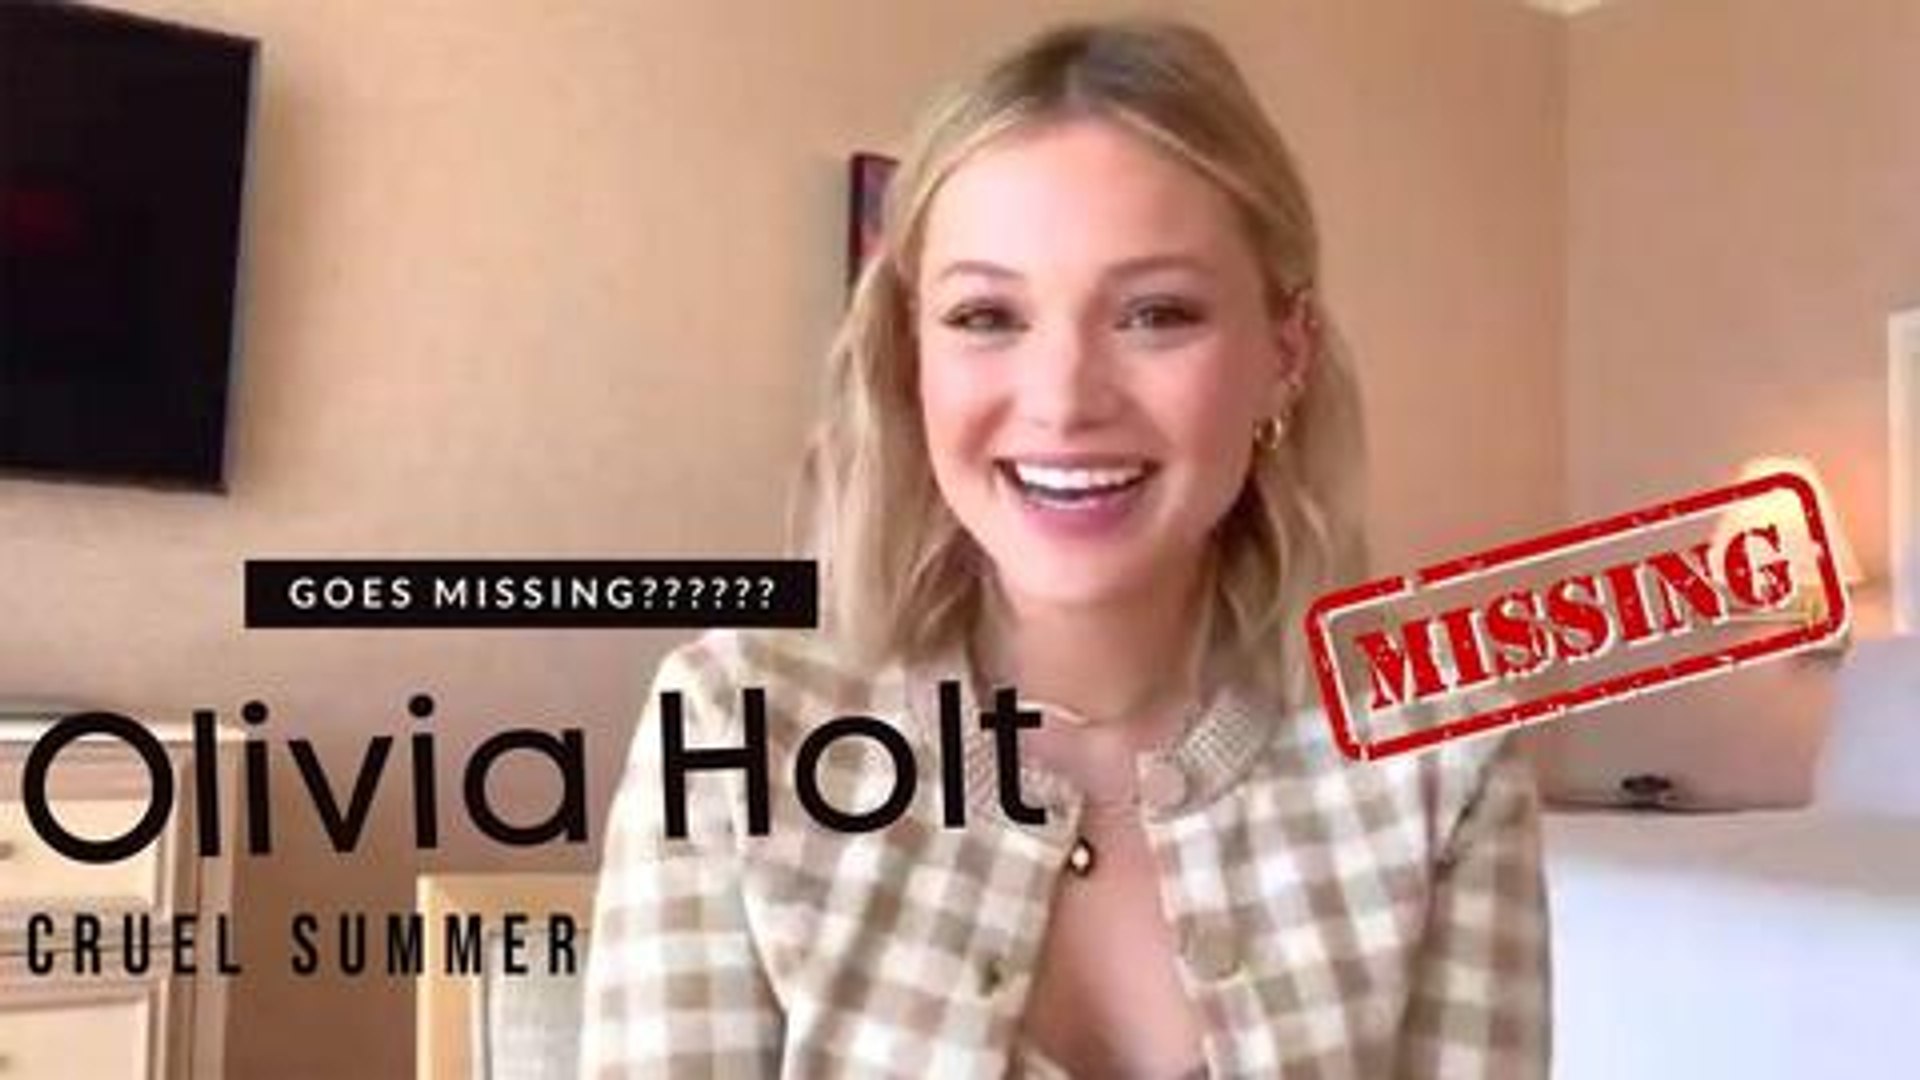 Olivia Holt on Cruel Summer Kissing Scenes & '90s Playlists - video  Dailymotion